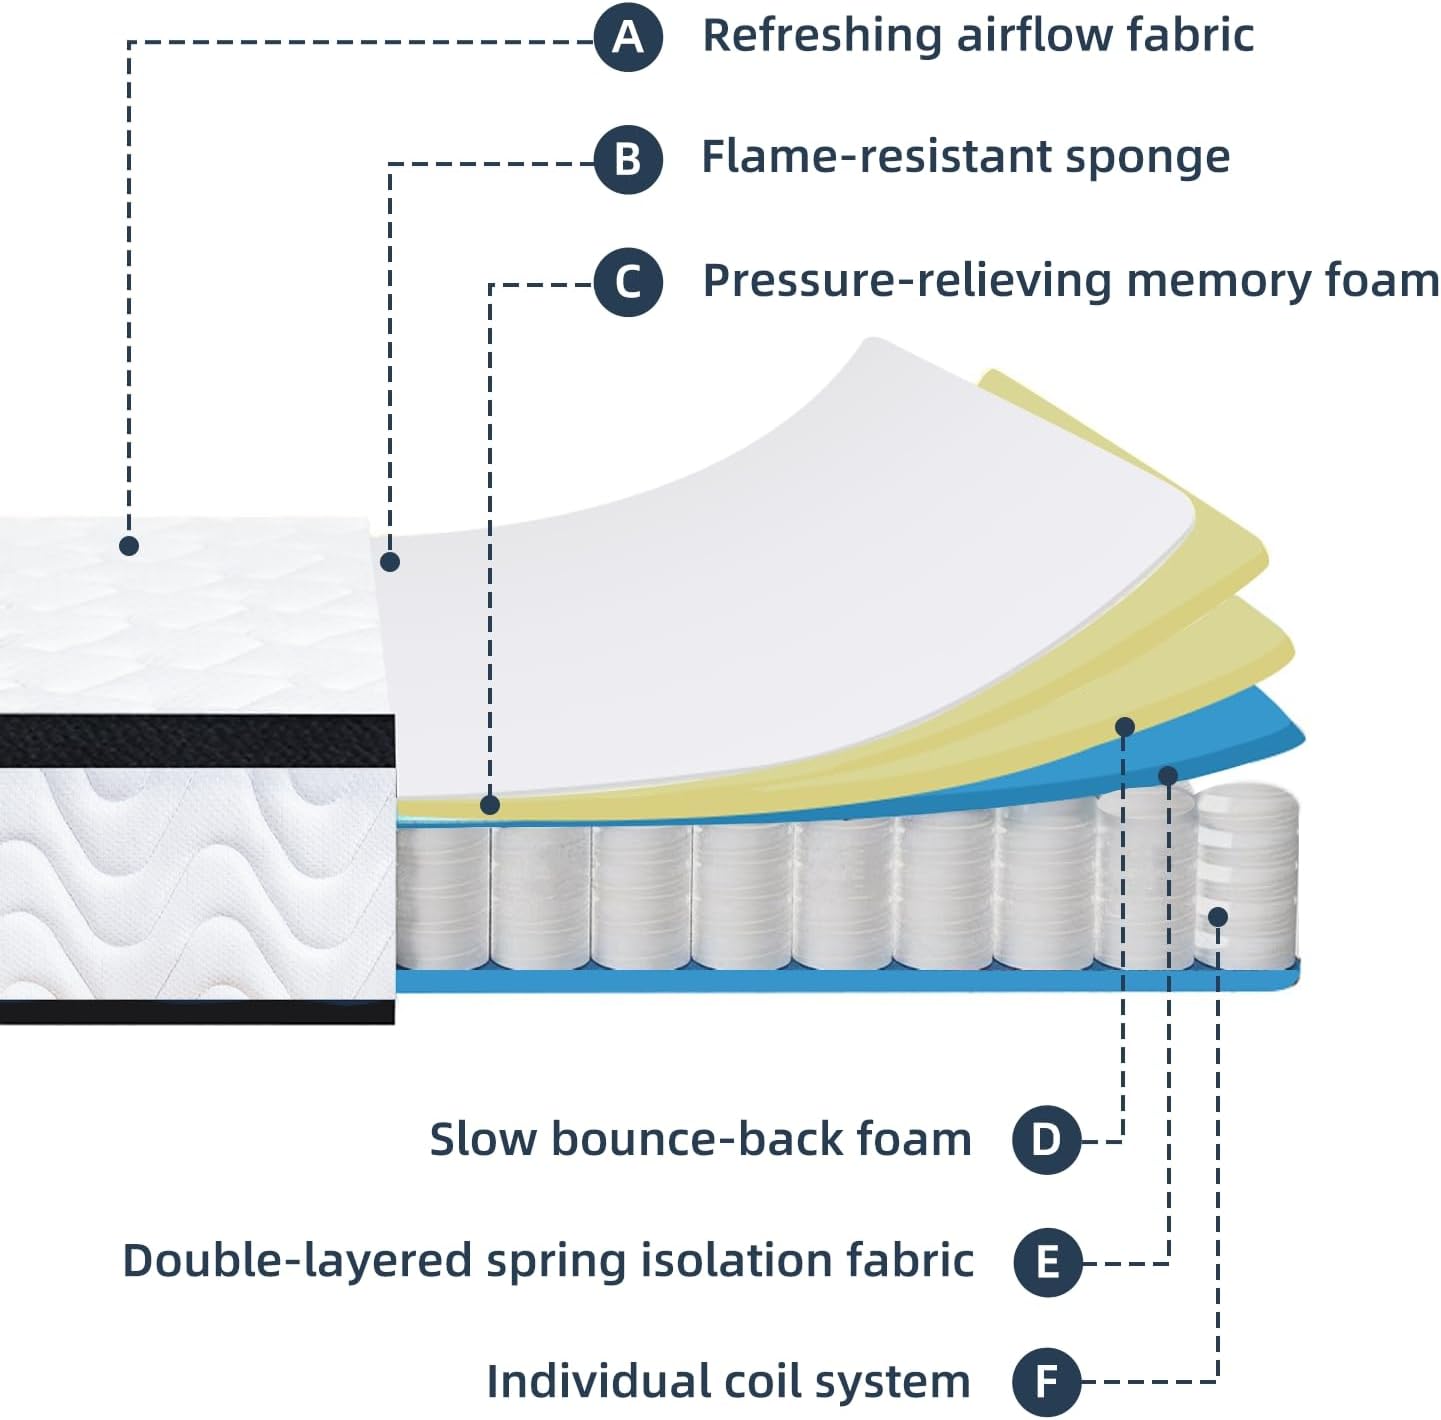 NEW - MOLBIUS QUEEN Mattress | 12 Inch Queen Size Hybrid Mattresses in a Box | Medium Firm Memory Foam and Individual Pocket Springs | Fiberglass Free Bed Mattress | Breathable | CertiPUR-US - Retail $229